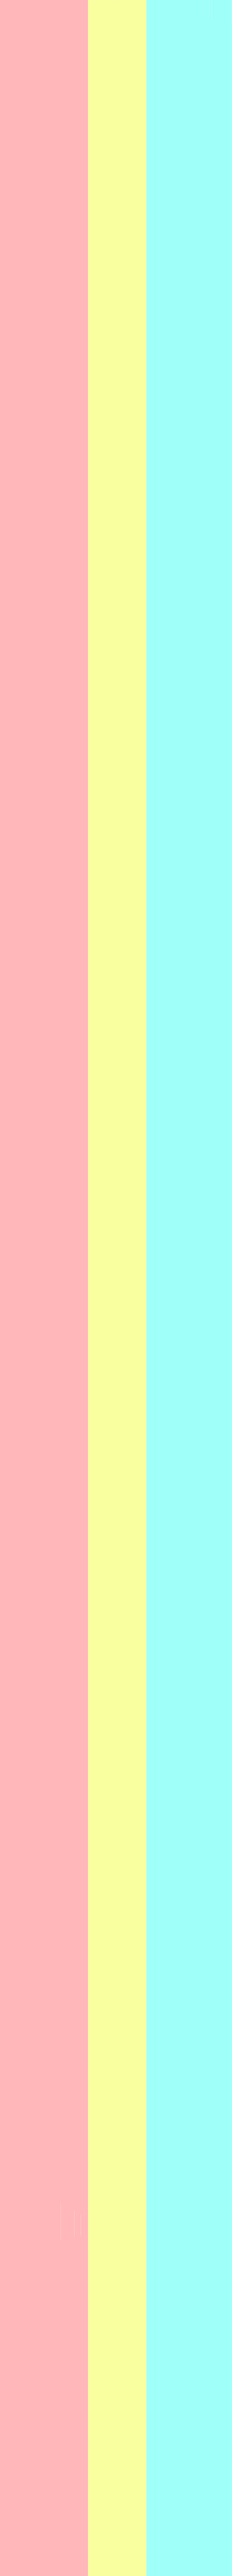 Pansexual Wallpaper Free Pansexual Background